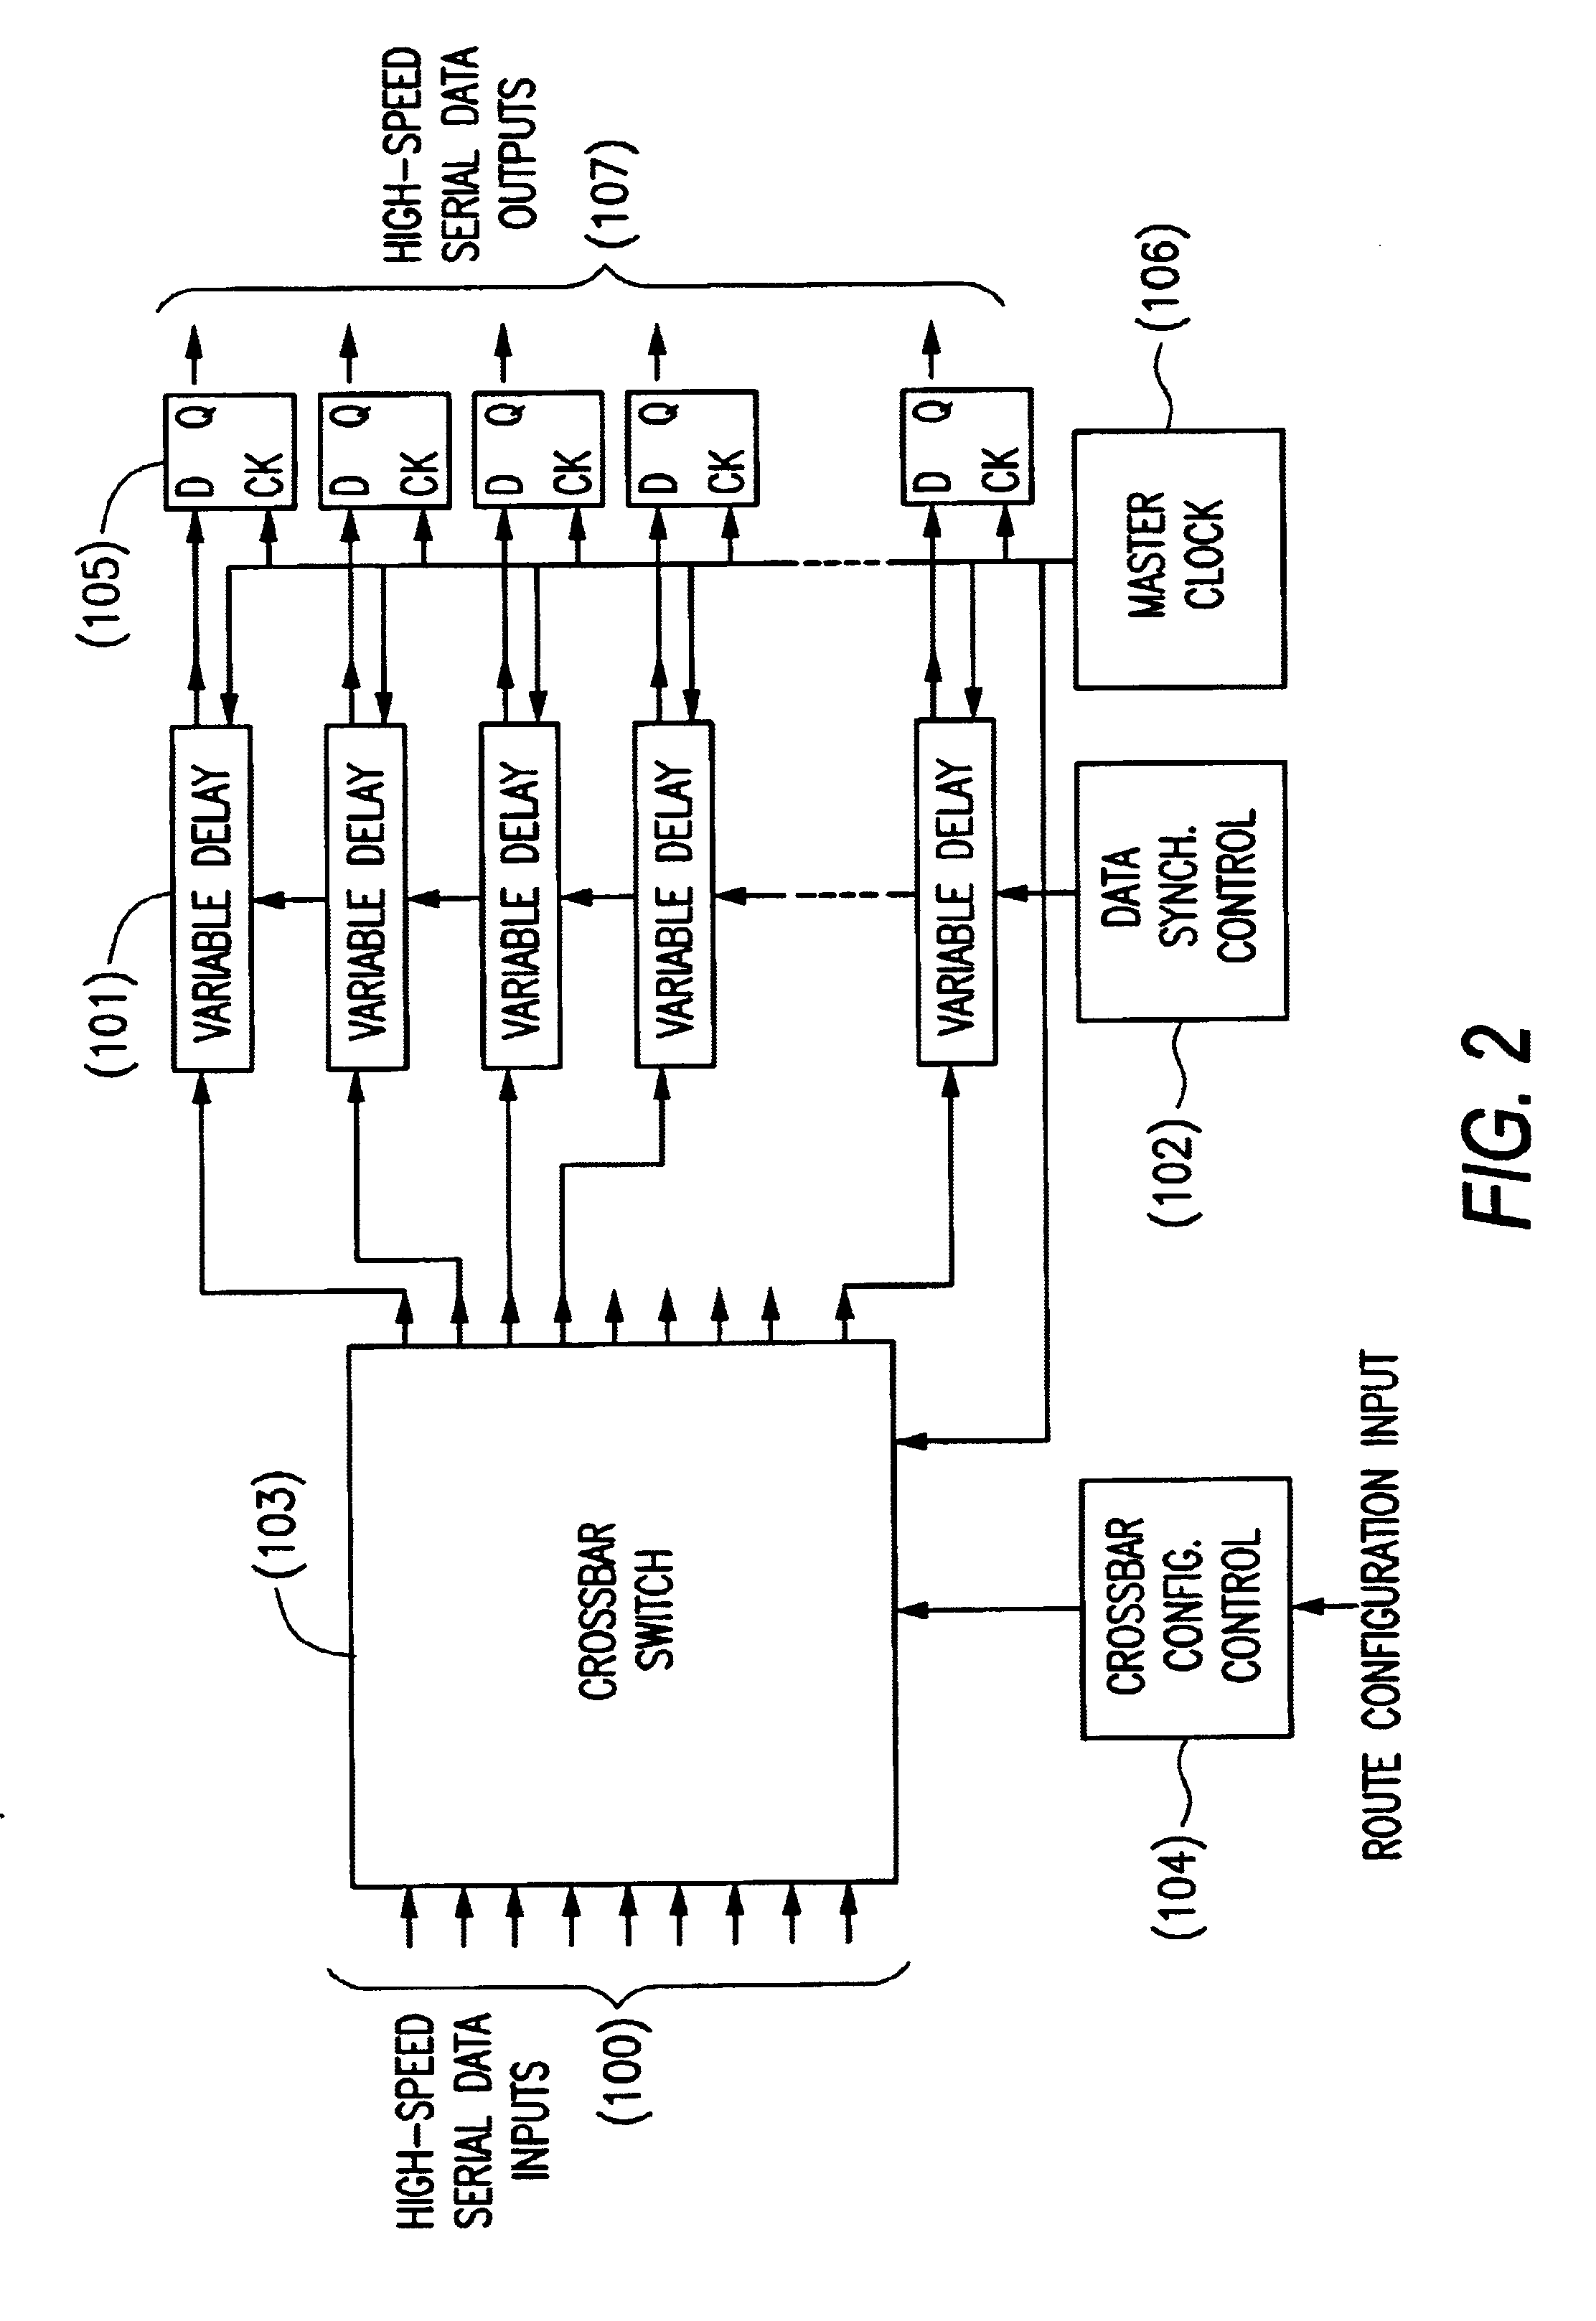 Crossbar switch and control for data networks switching